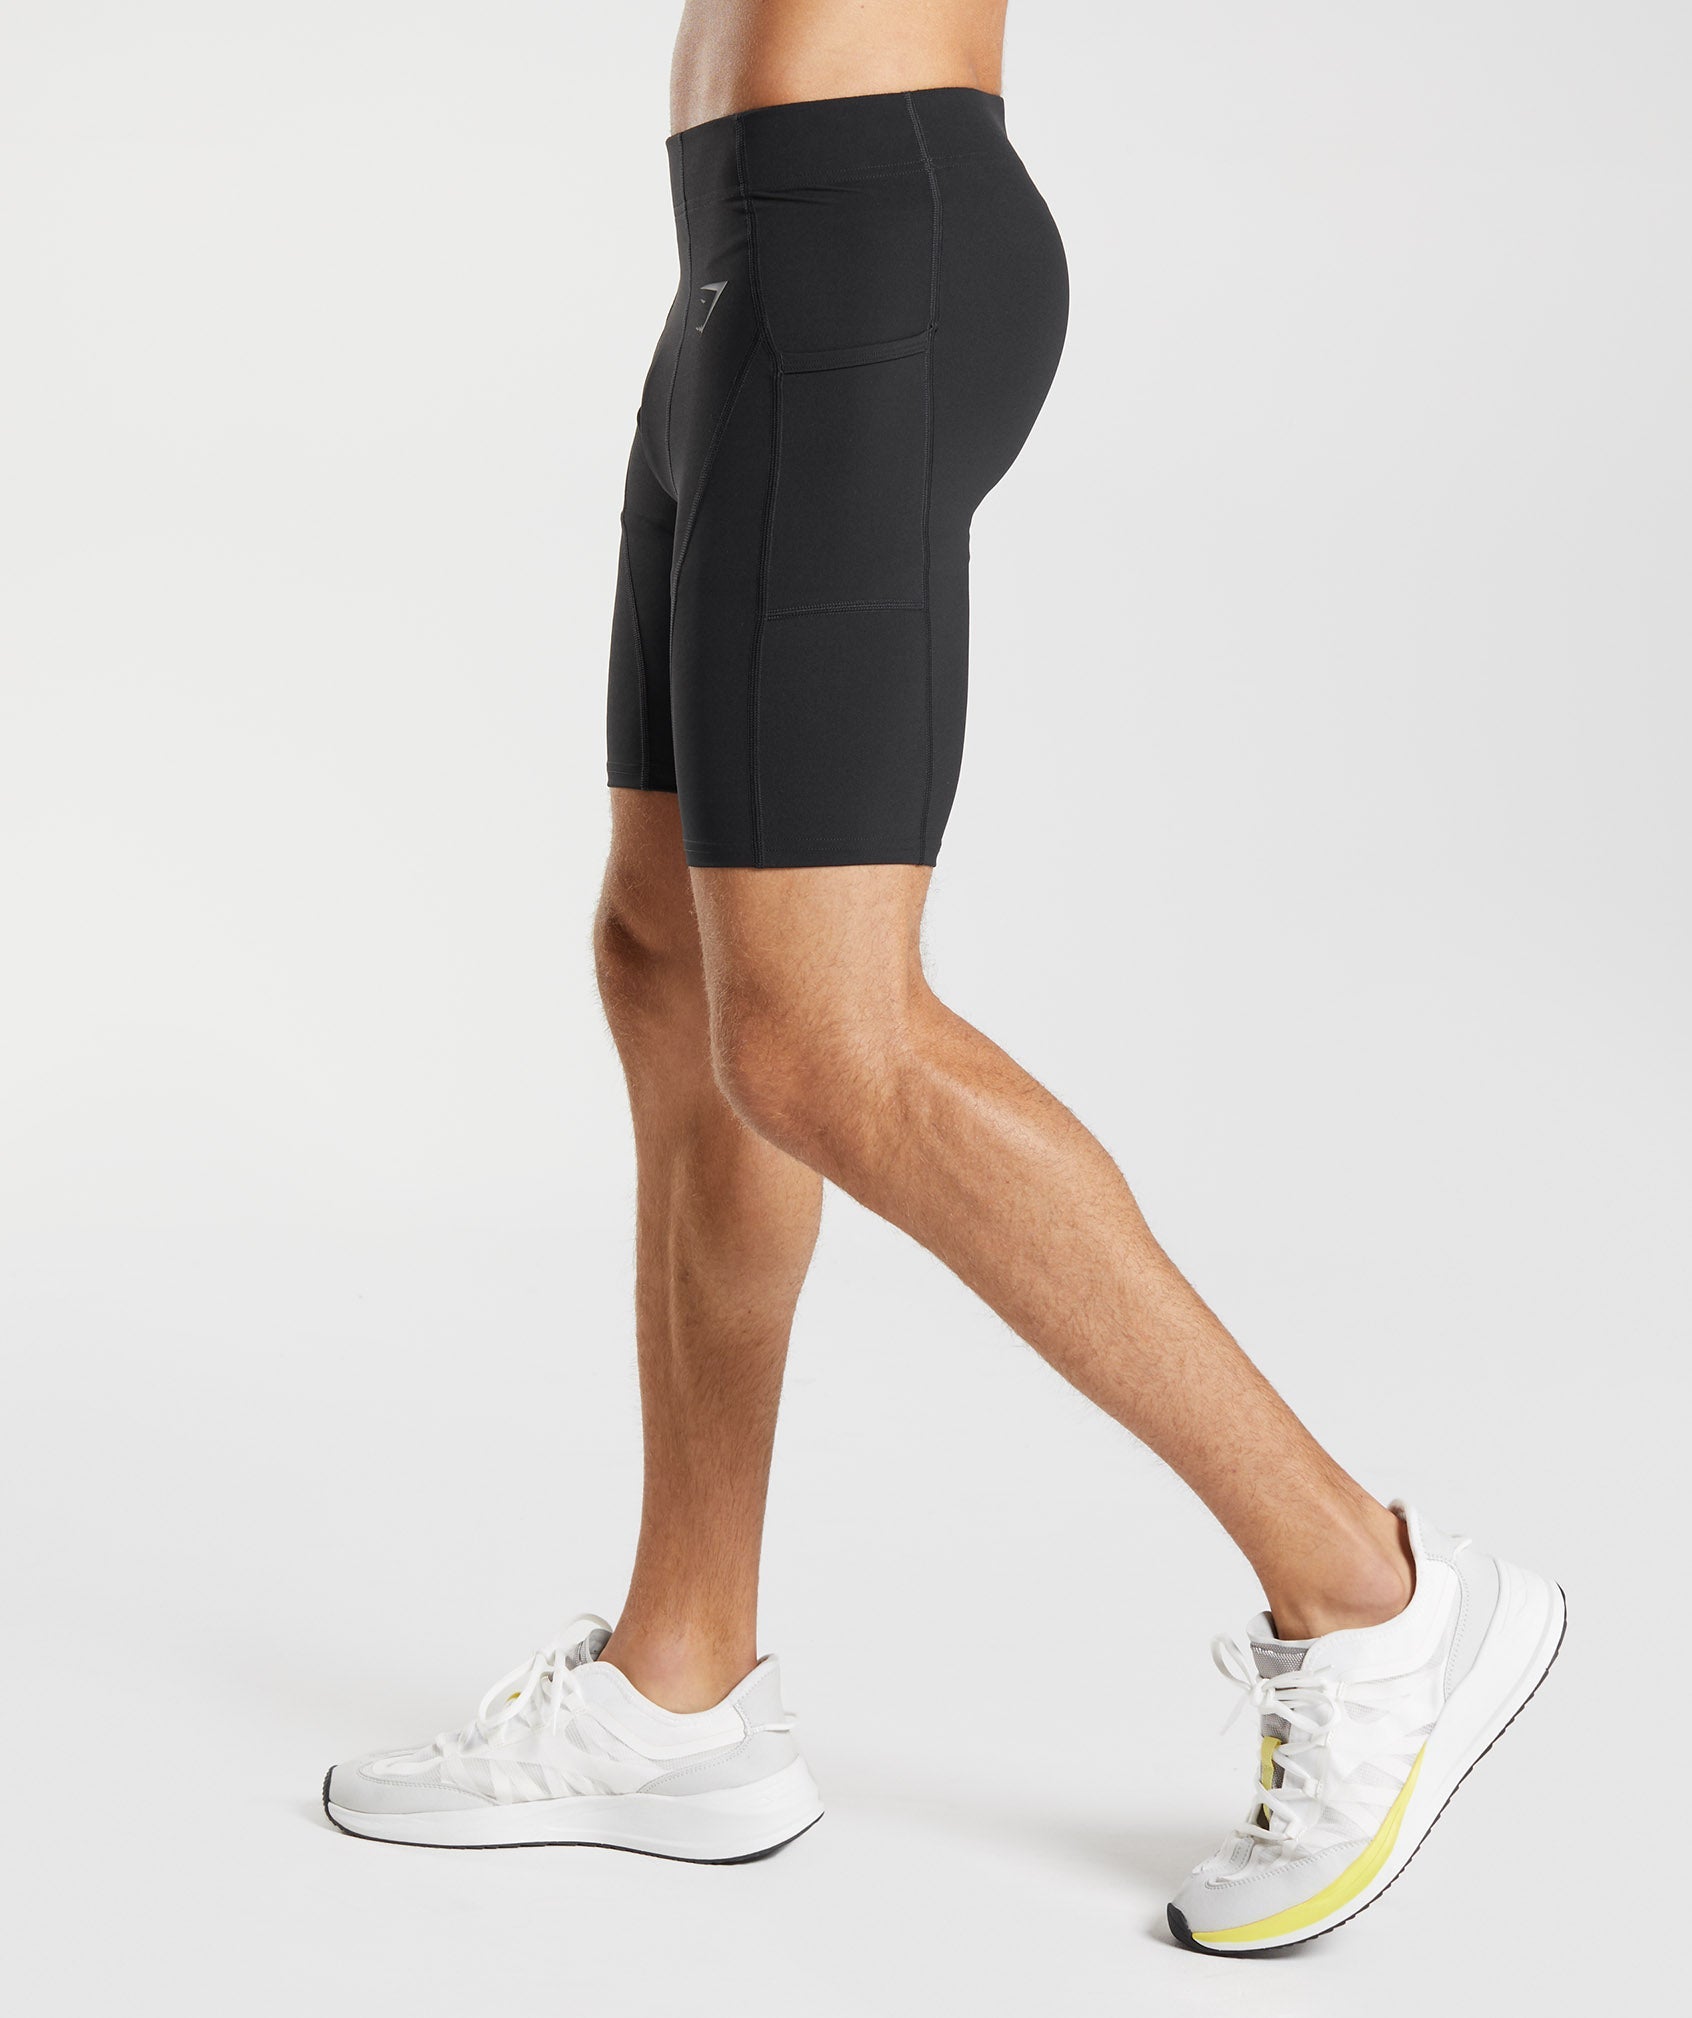 Control Baselayer Shorts in Black - view 3